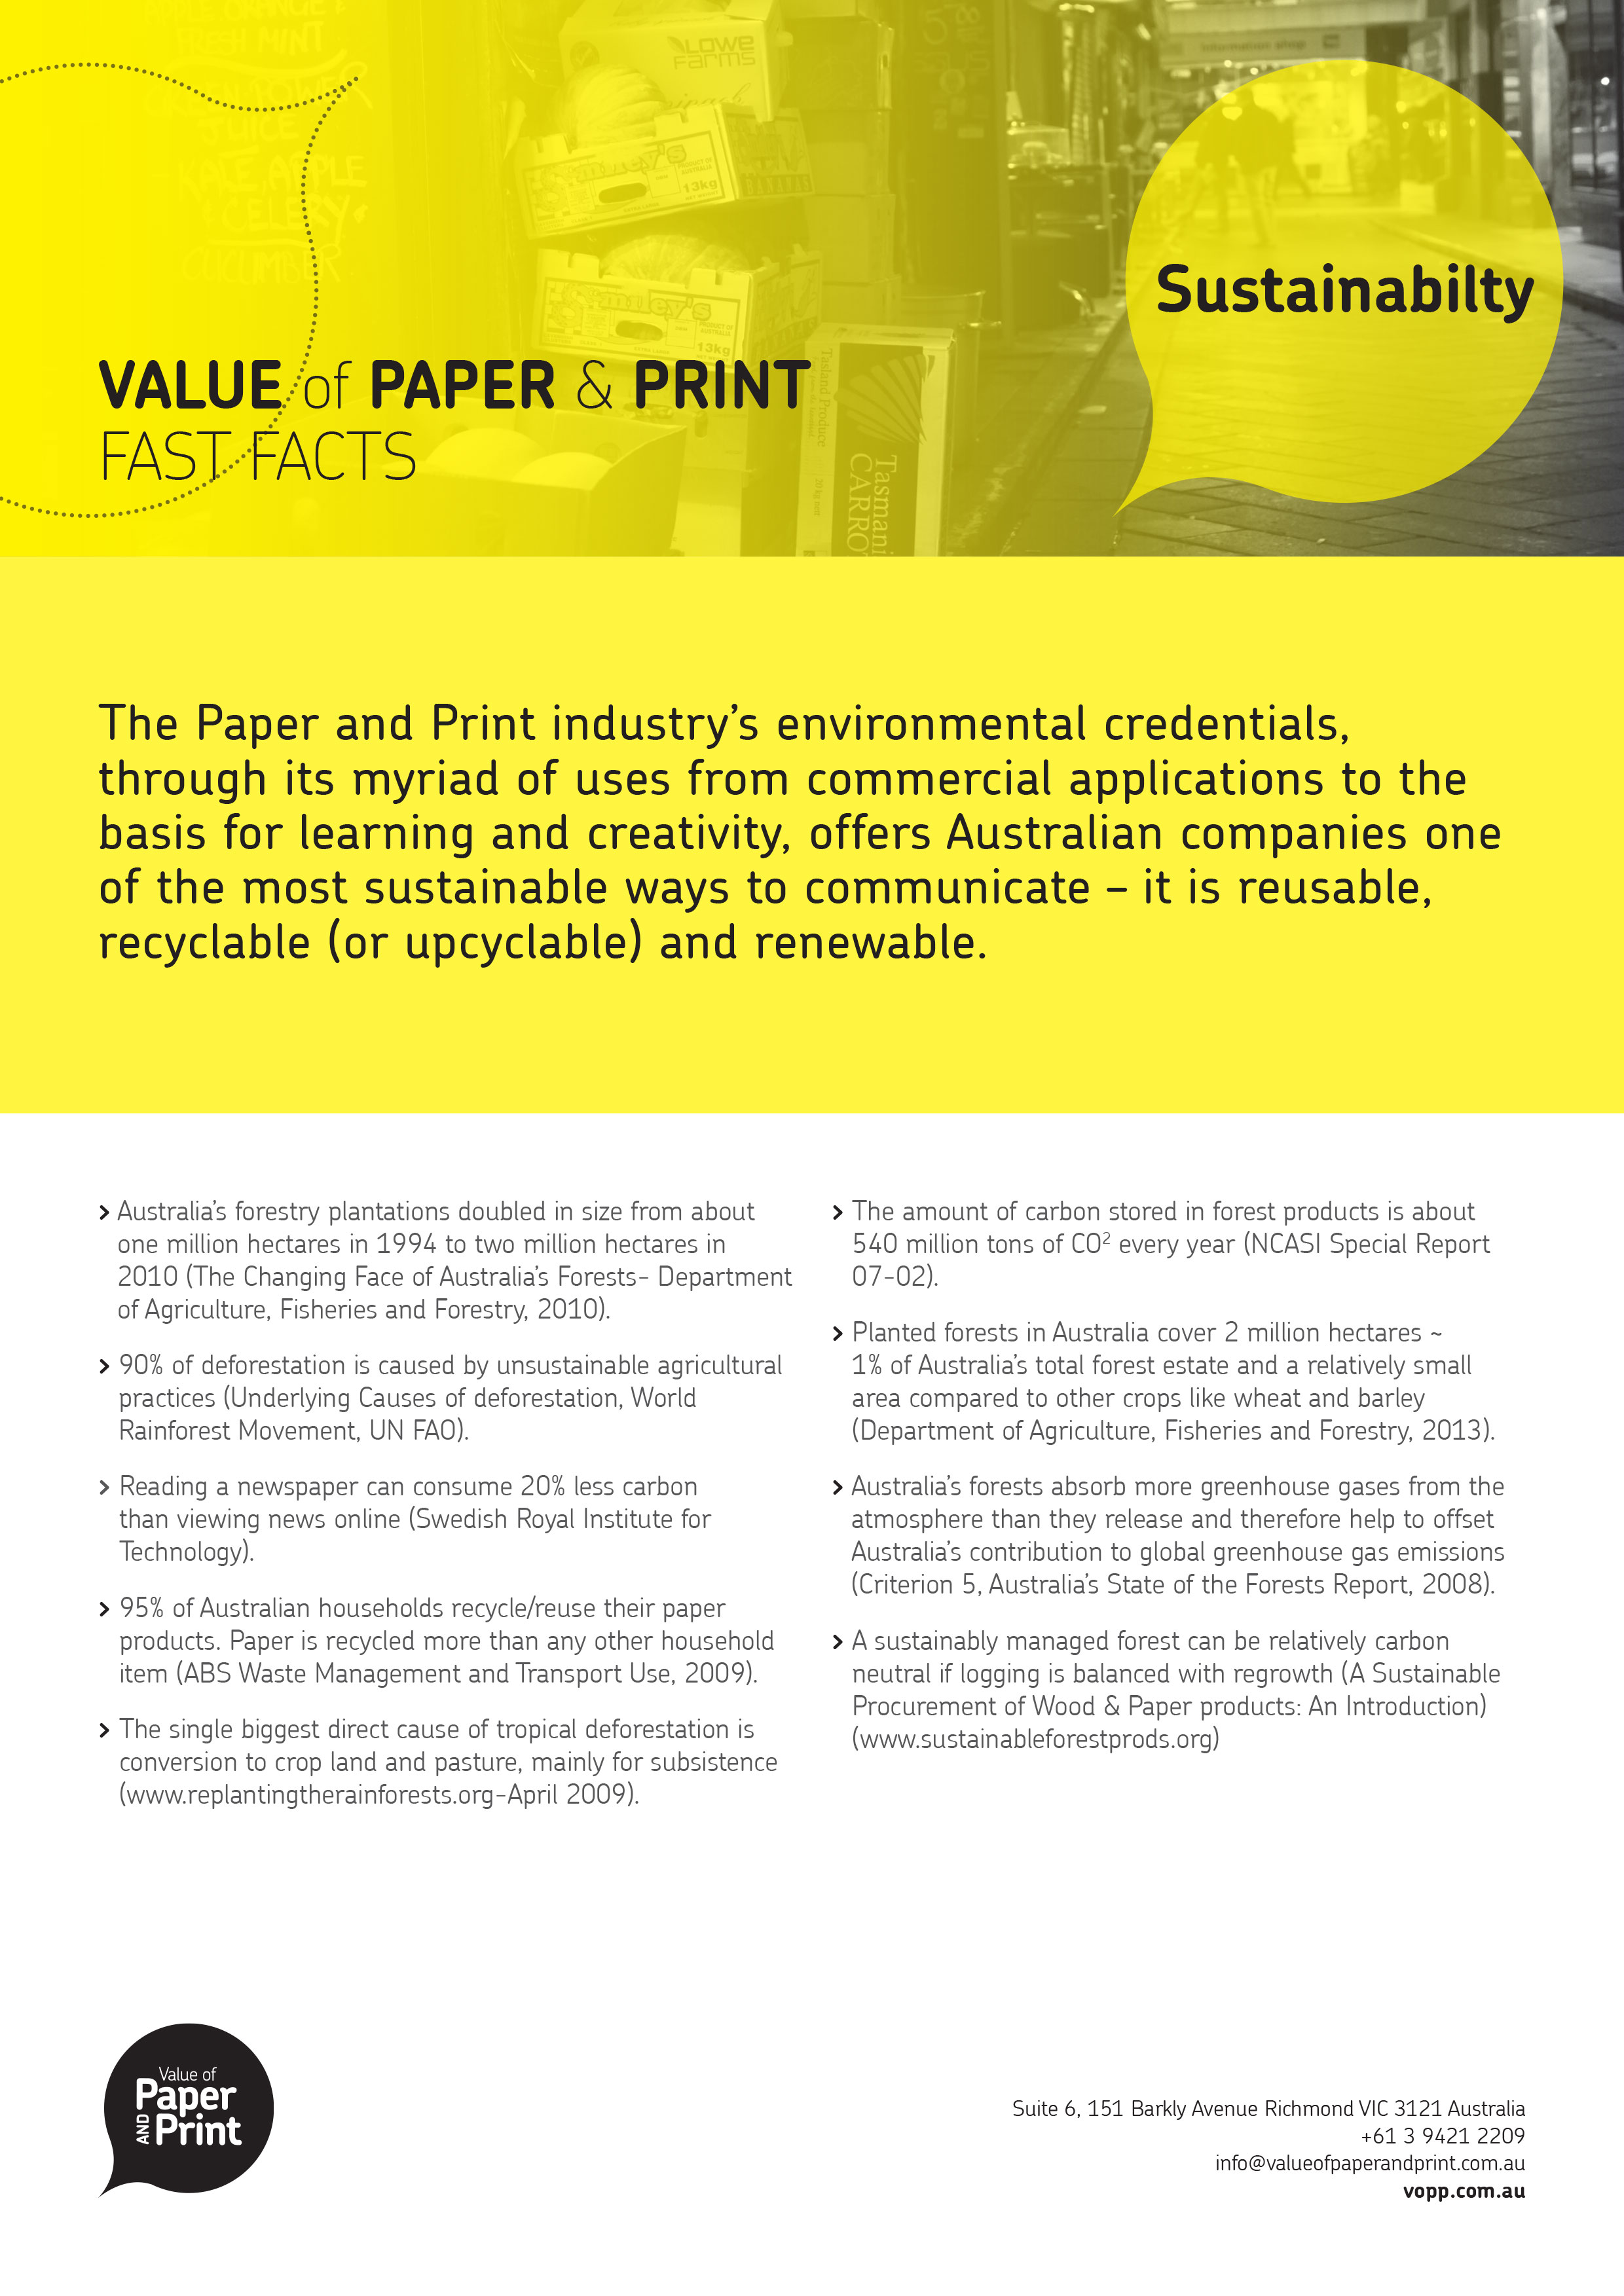 Value of paper & print - Fast Facts